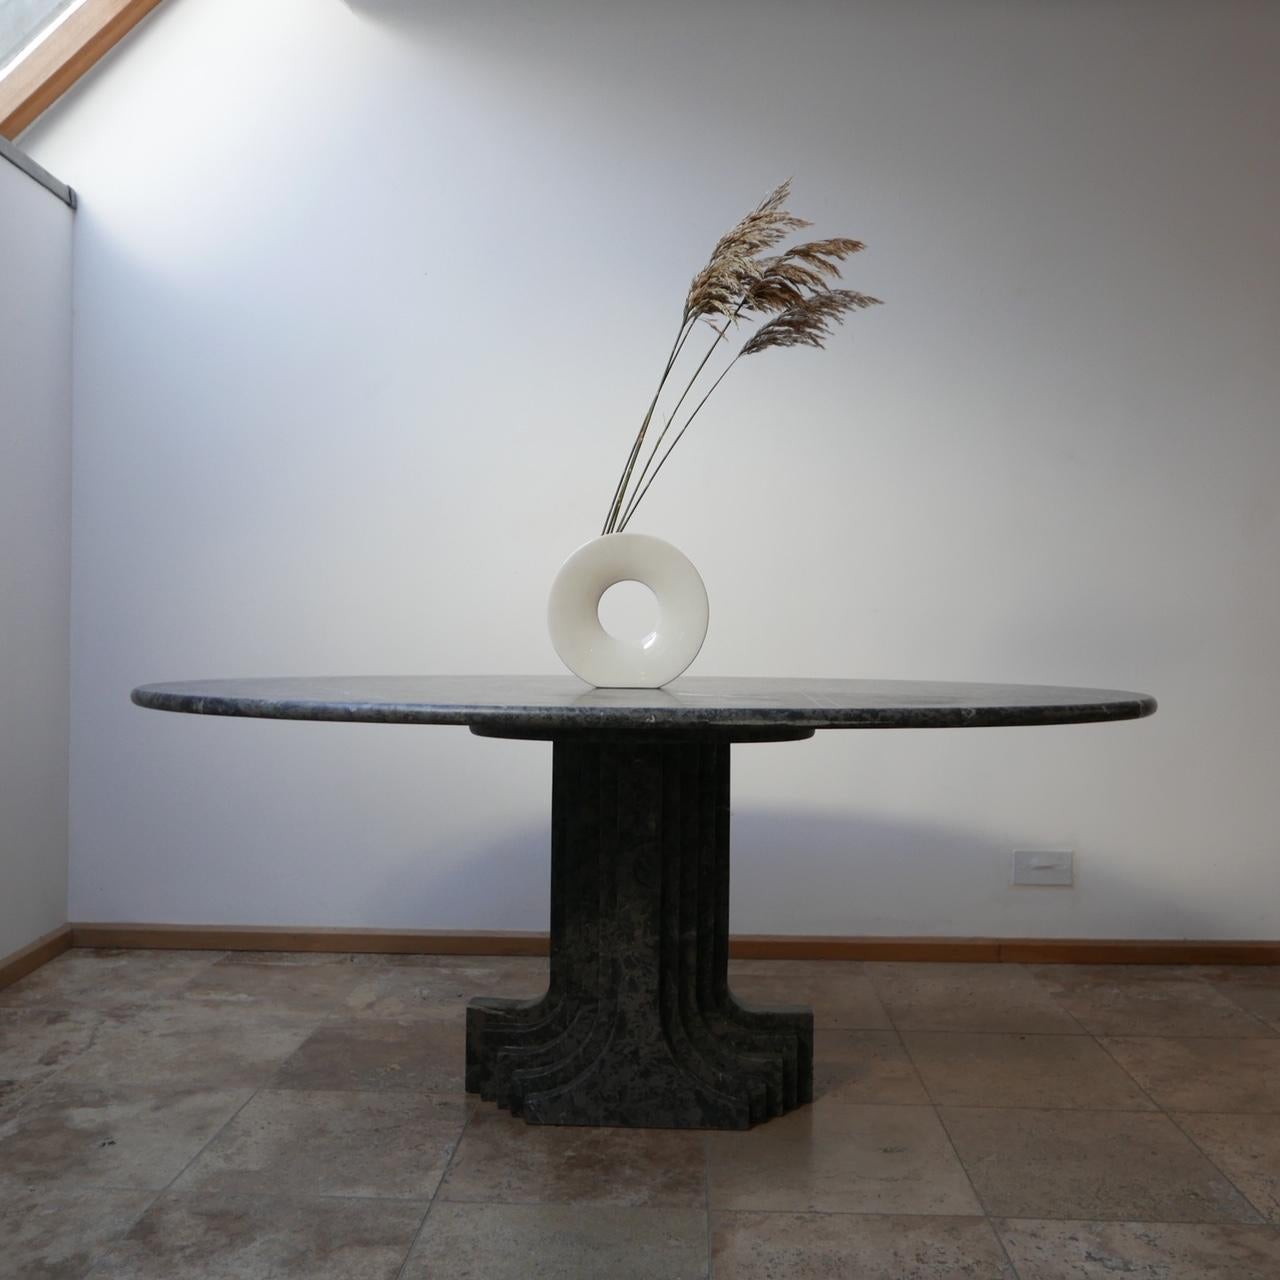 A scarce marble table by Carlo Scarpa.

Italian, circa 1980s.

Beautiful veined marble with evidence of ammonites in the stone.

A scarce design that is completely timeless.

The architectural influenced base is a piece of art in